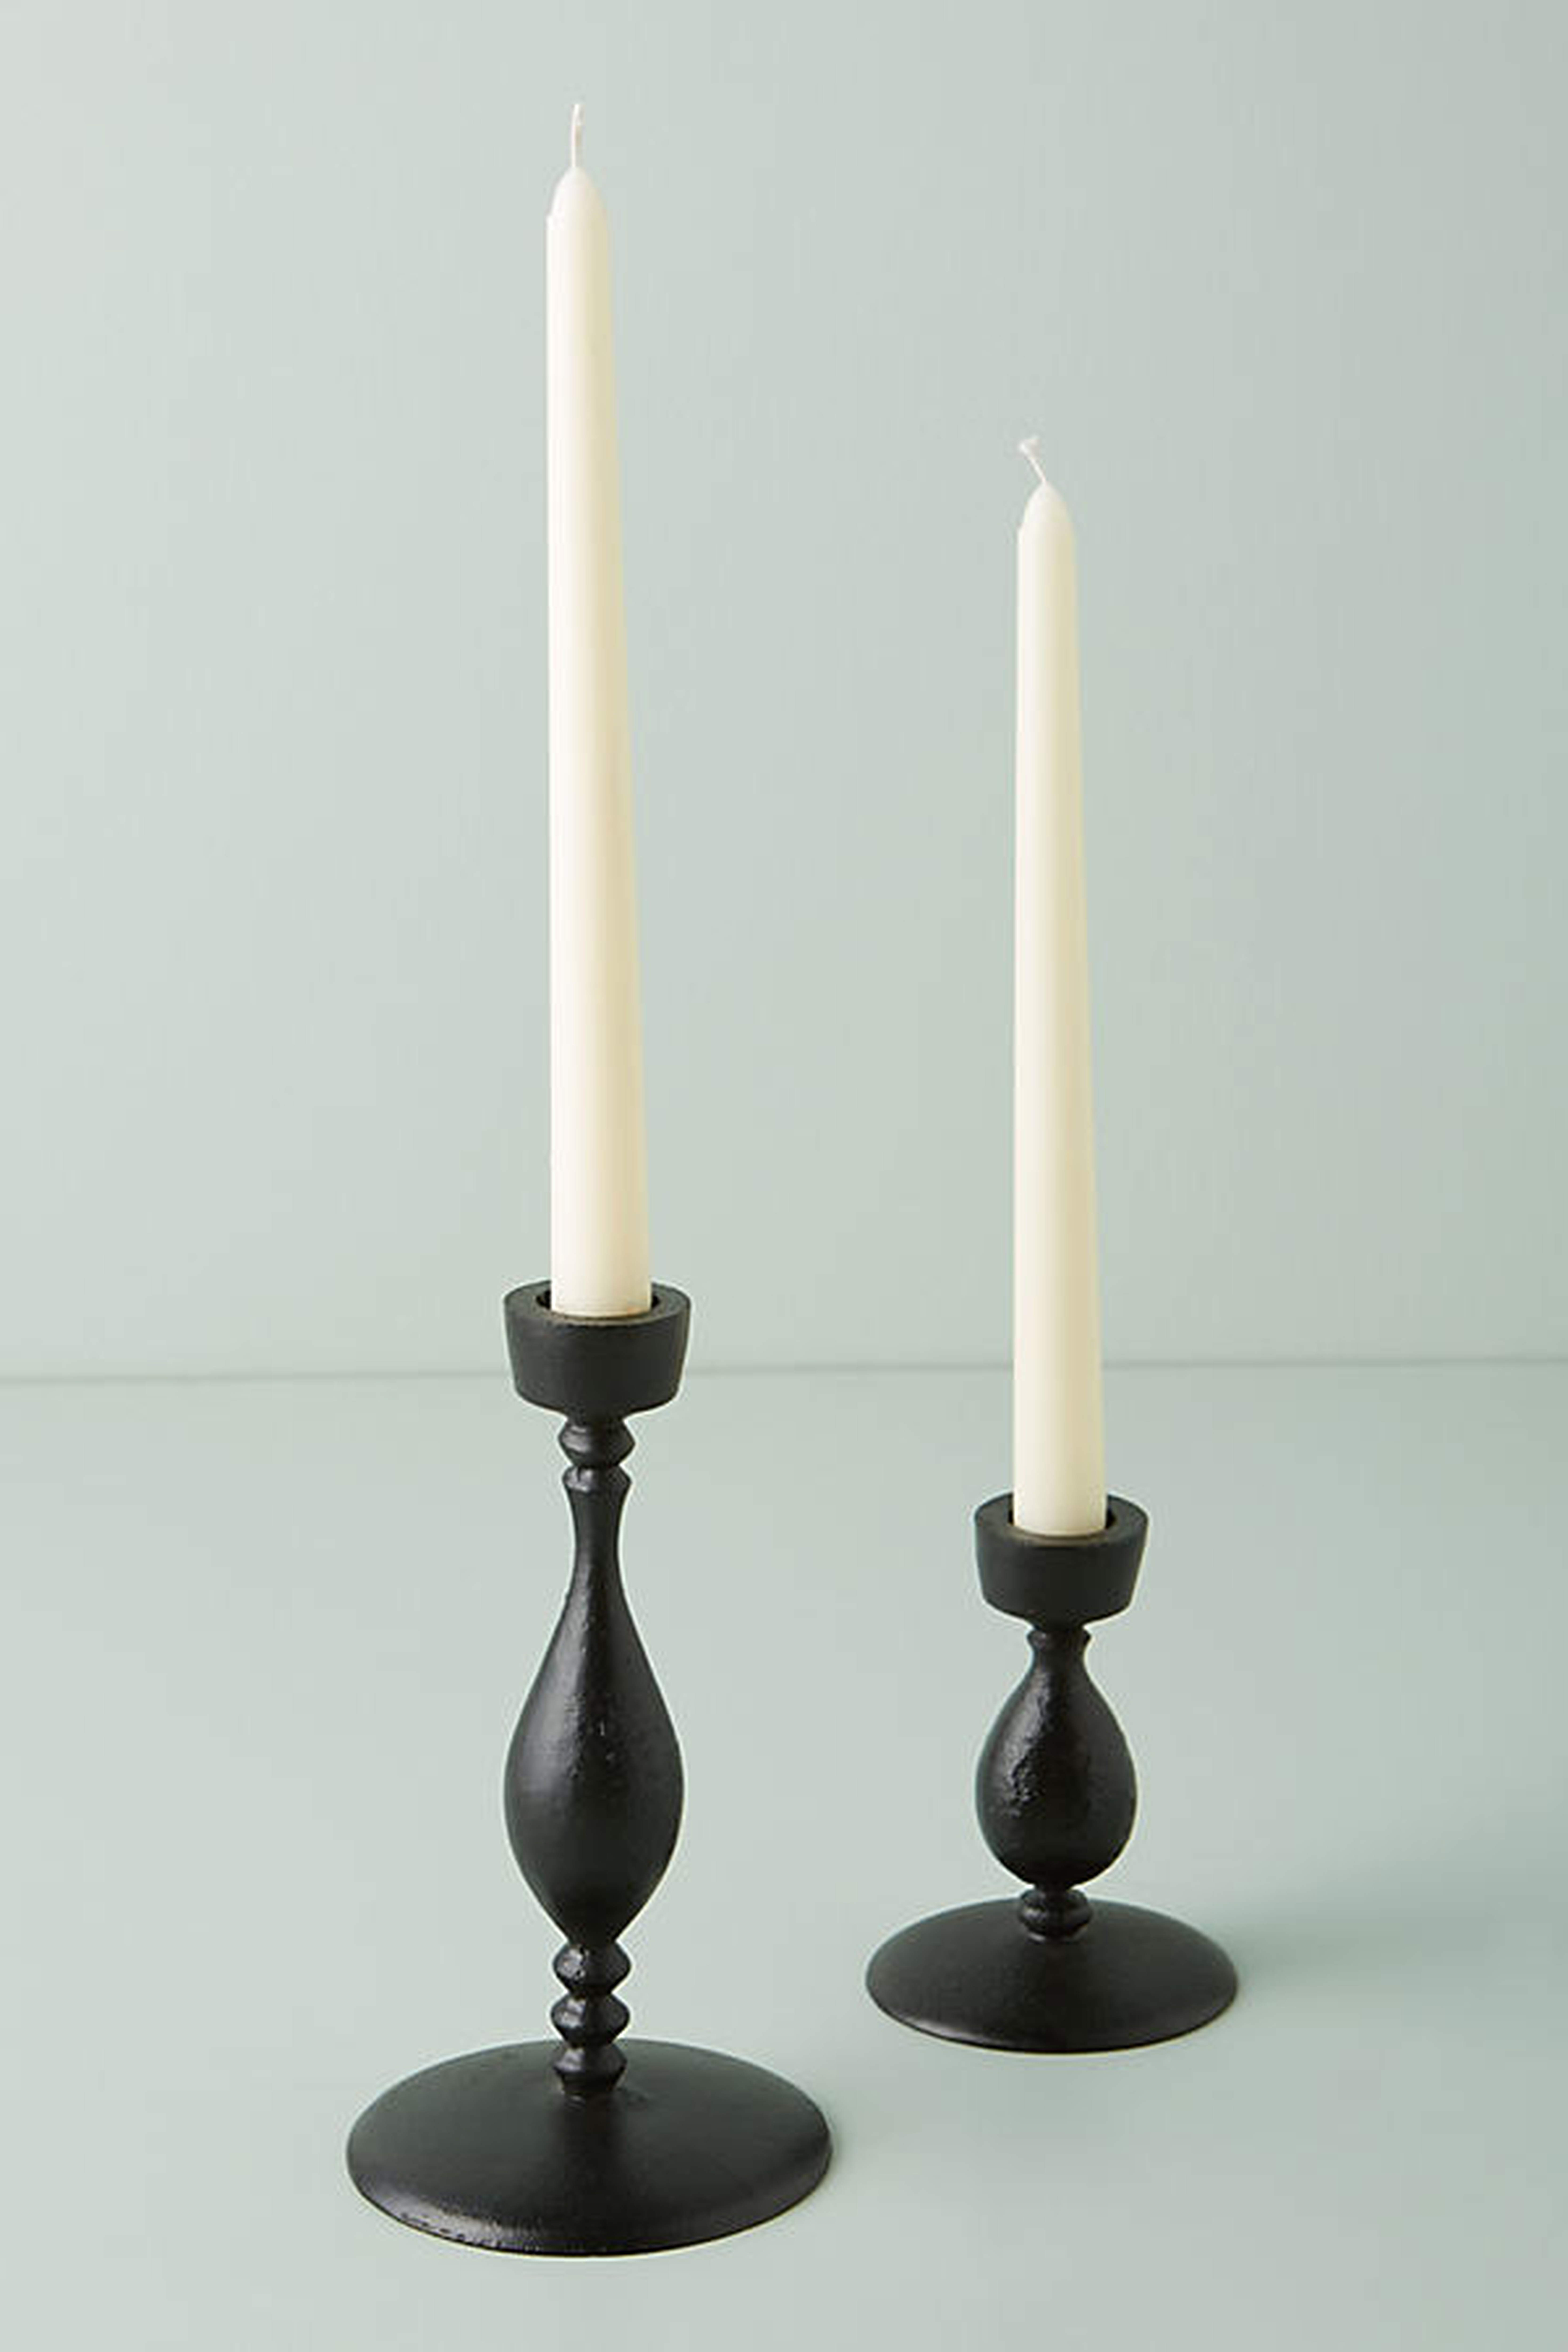 Victoria Taper Candle Holder By Anthropologie in Black Size S - Anthropologie